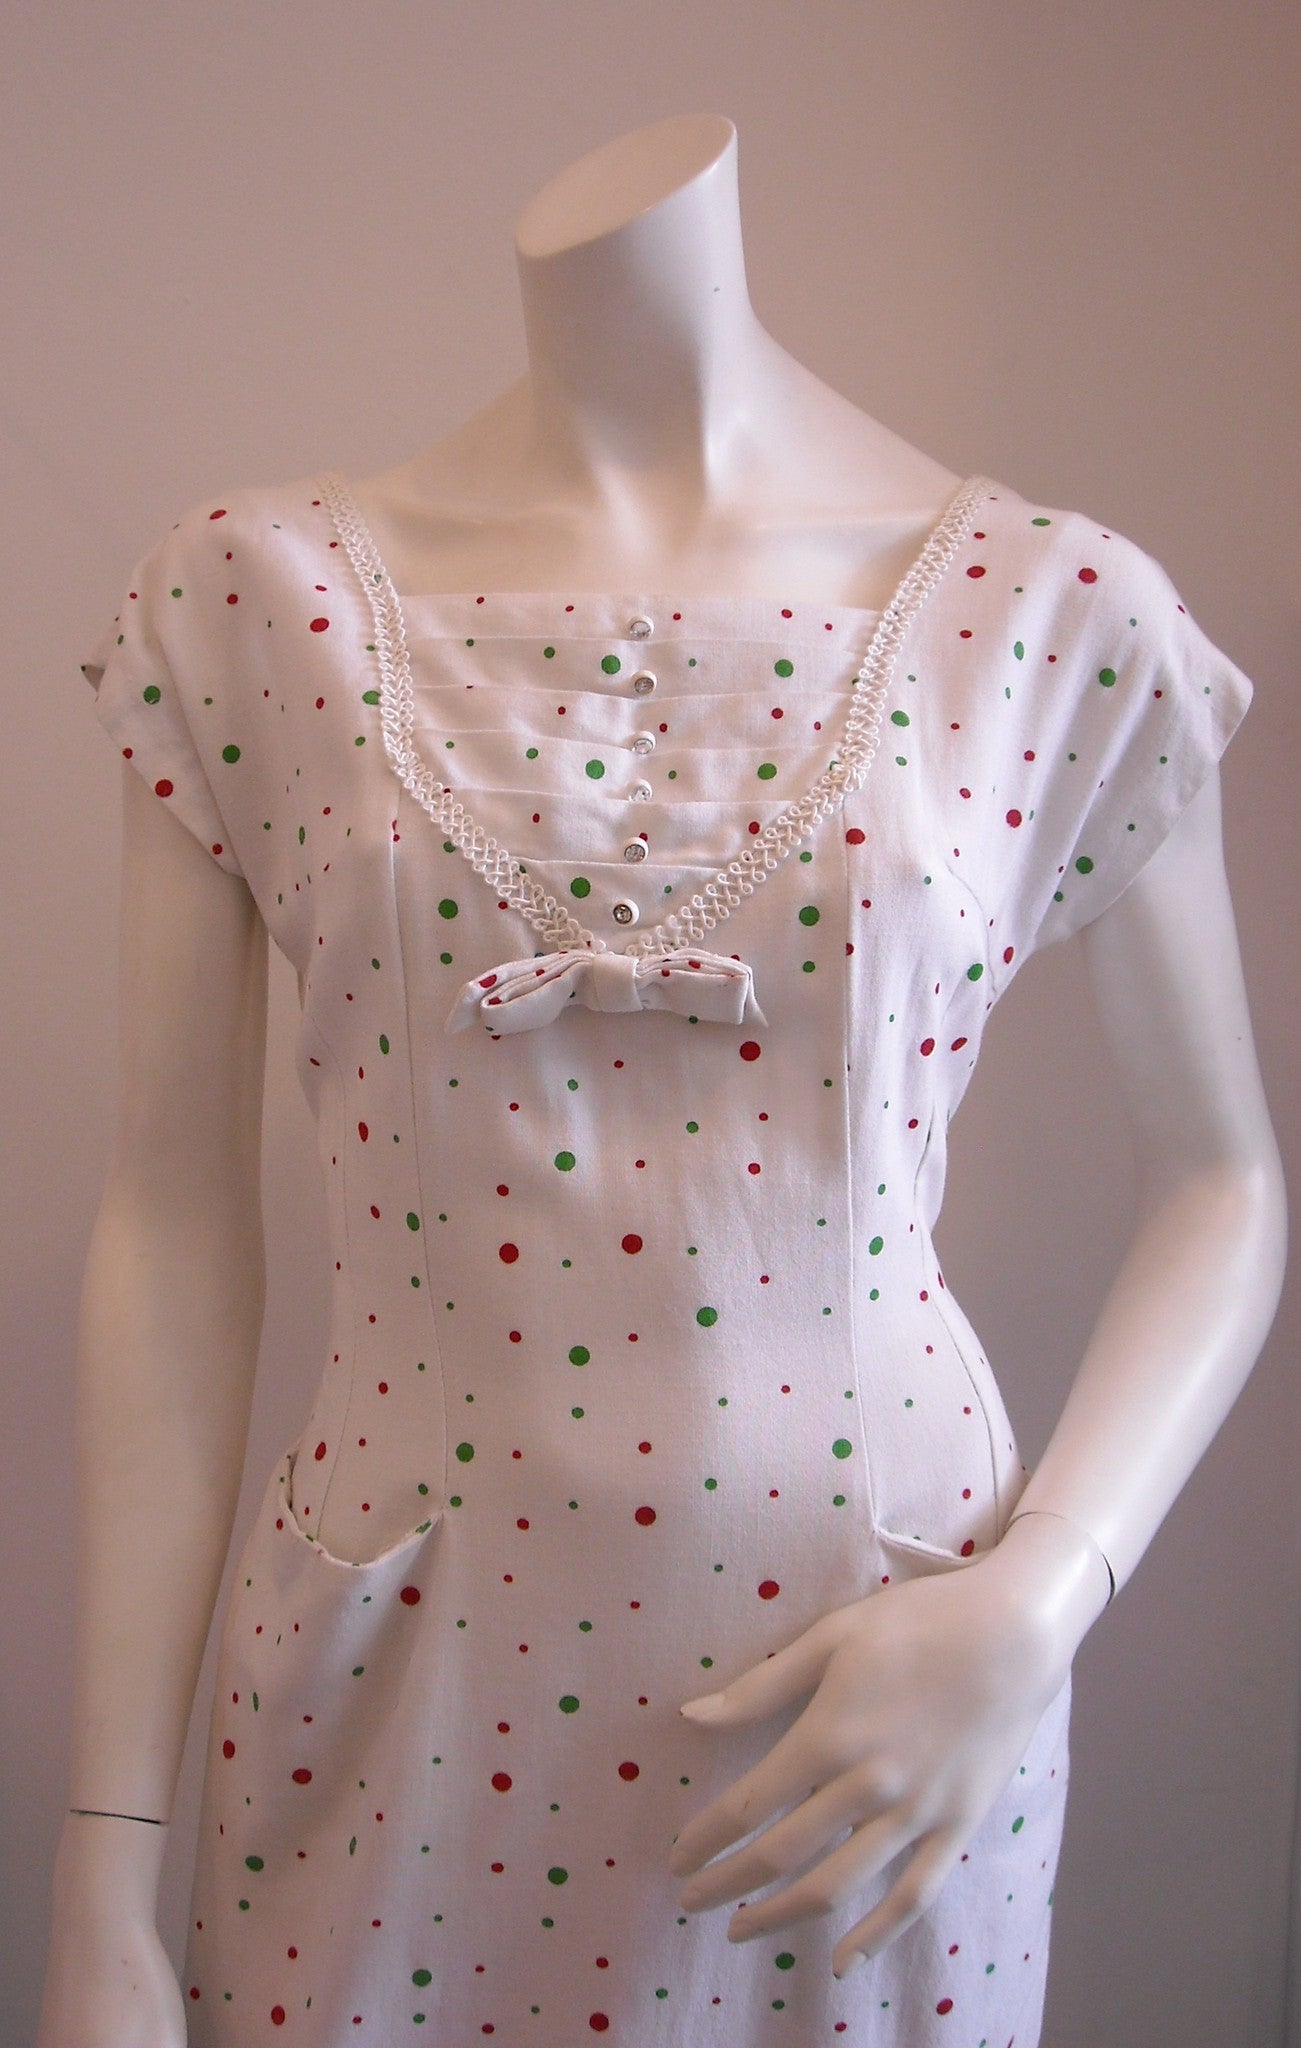 Colorful Bubbling Polka Dots Structured Vintage Dress